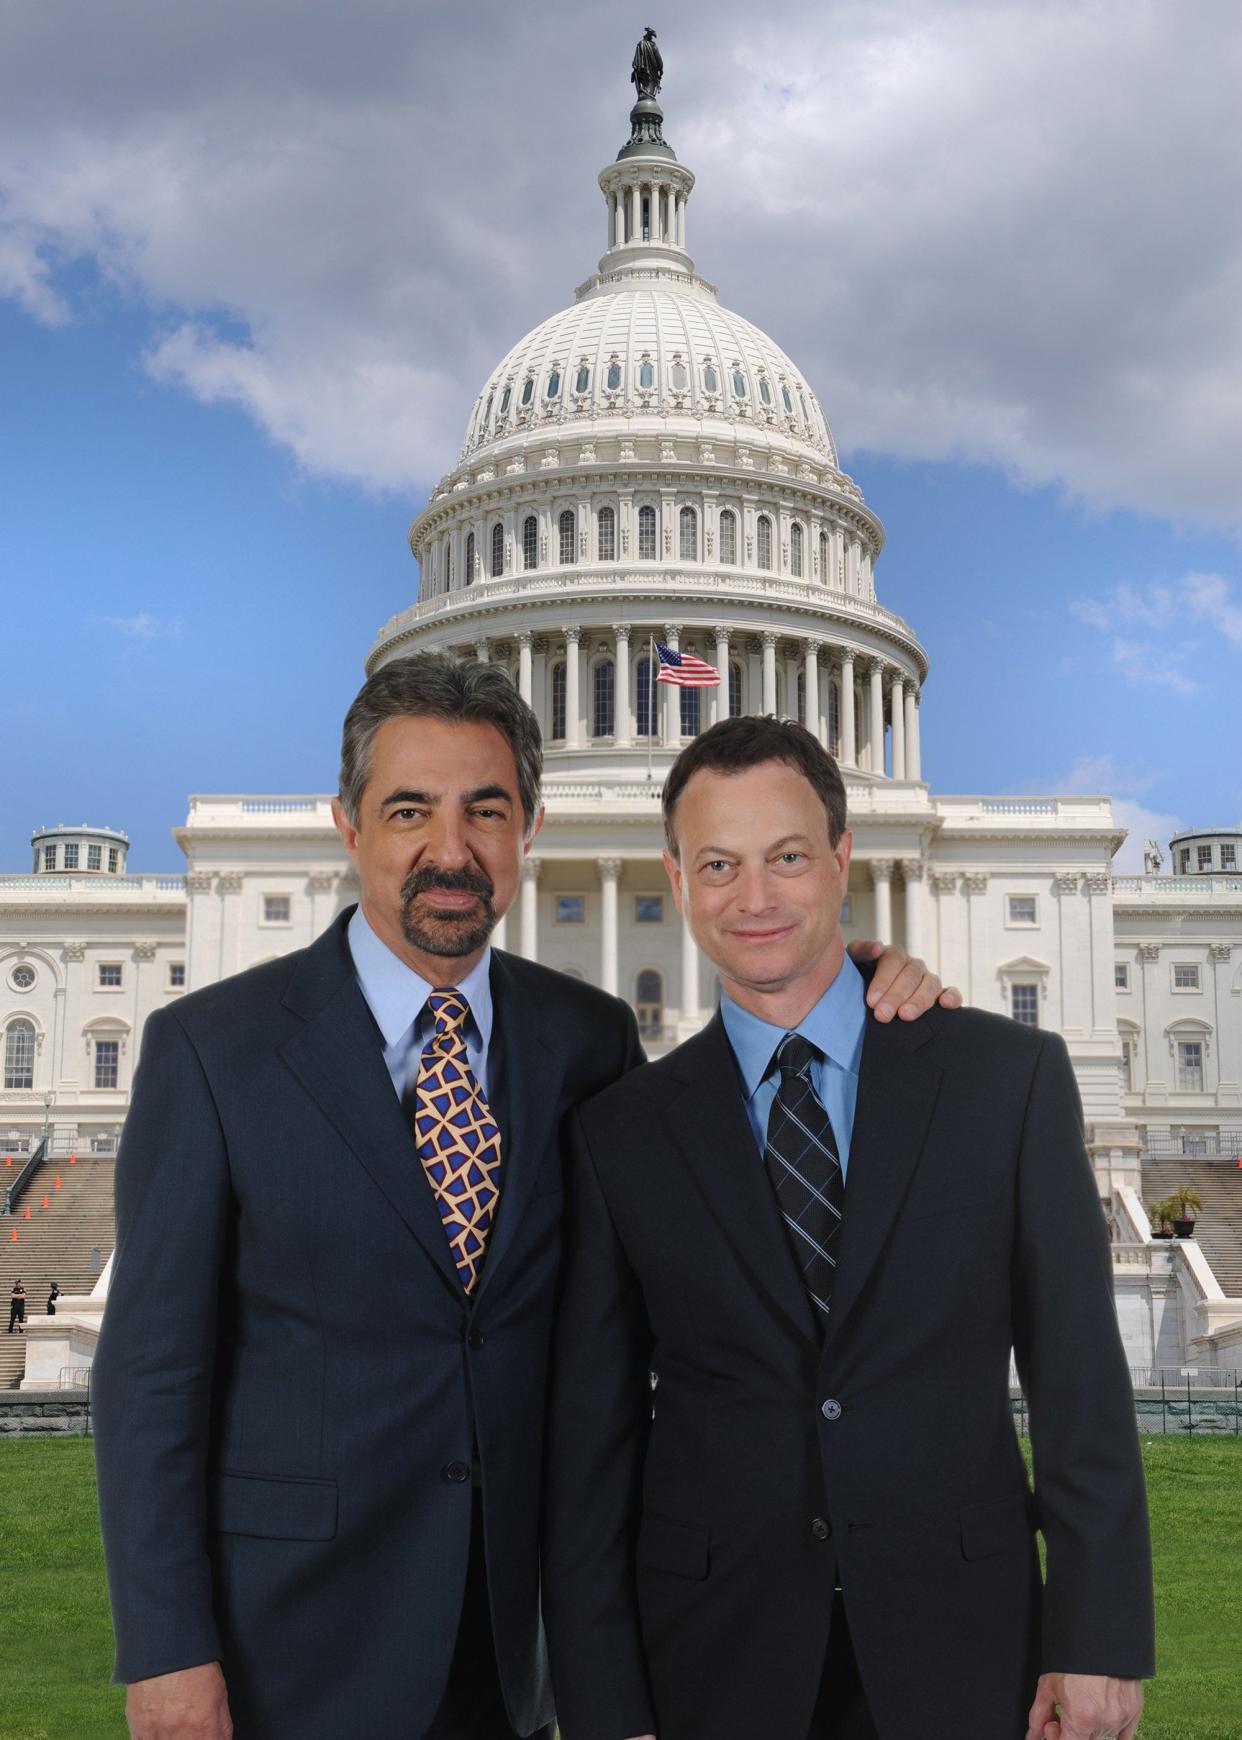 Joe Mantegna, left, and Gary Sinise will again co-host the "National Memorial Day Concert" on PBS.